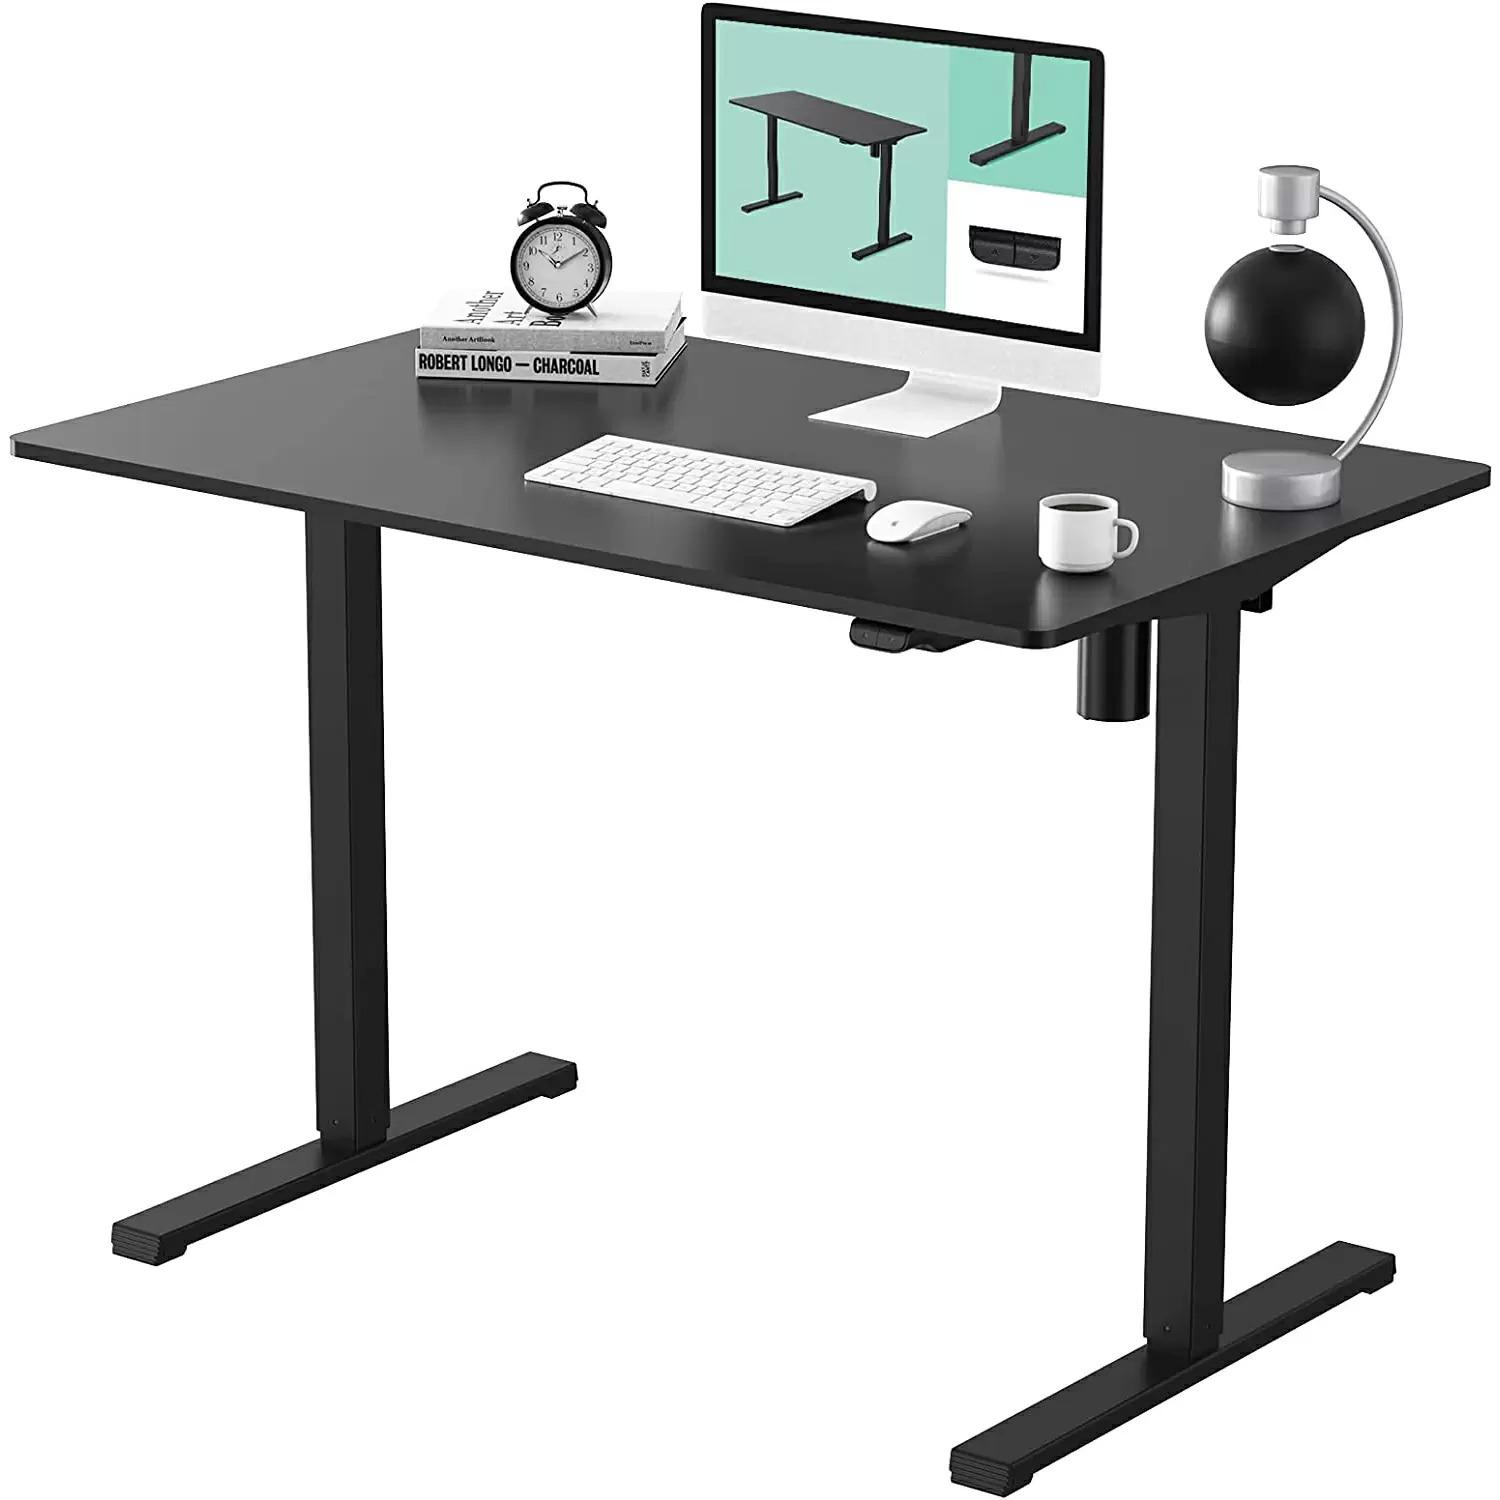 Height Adjustable Electric Standing Desk for $137.49 Shipped